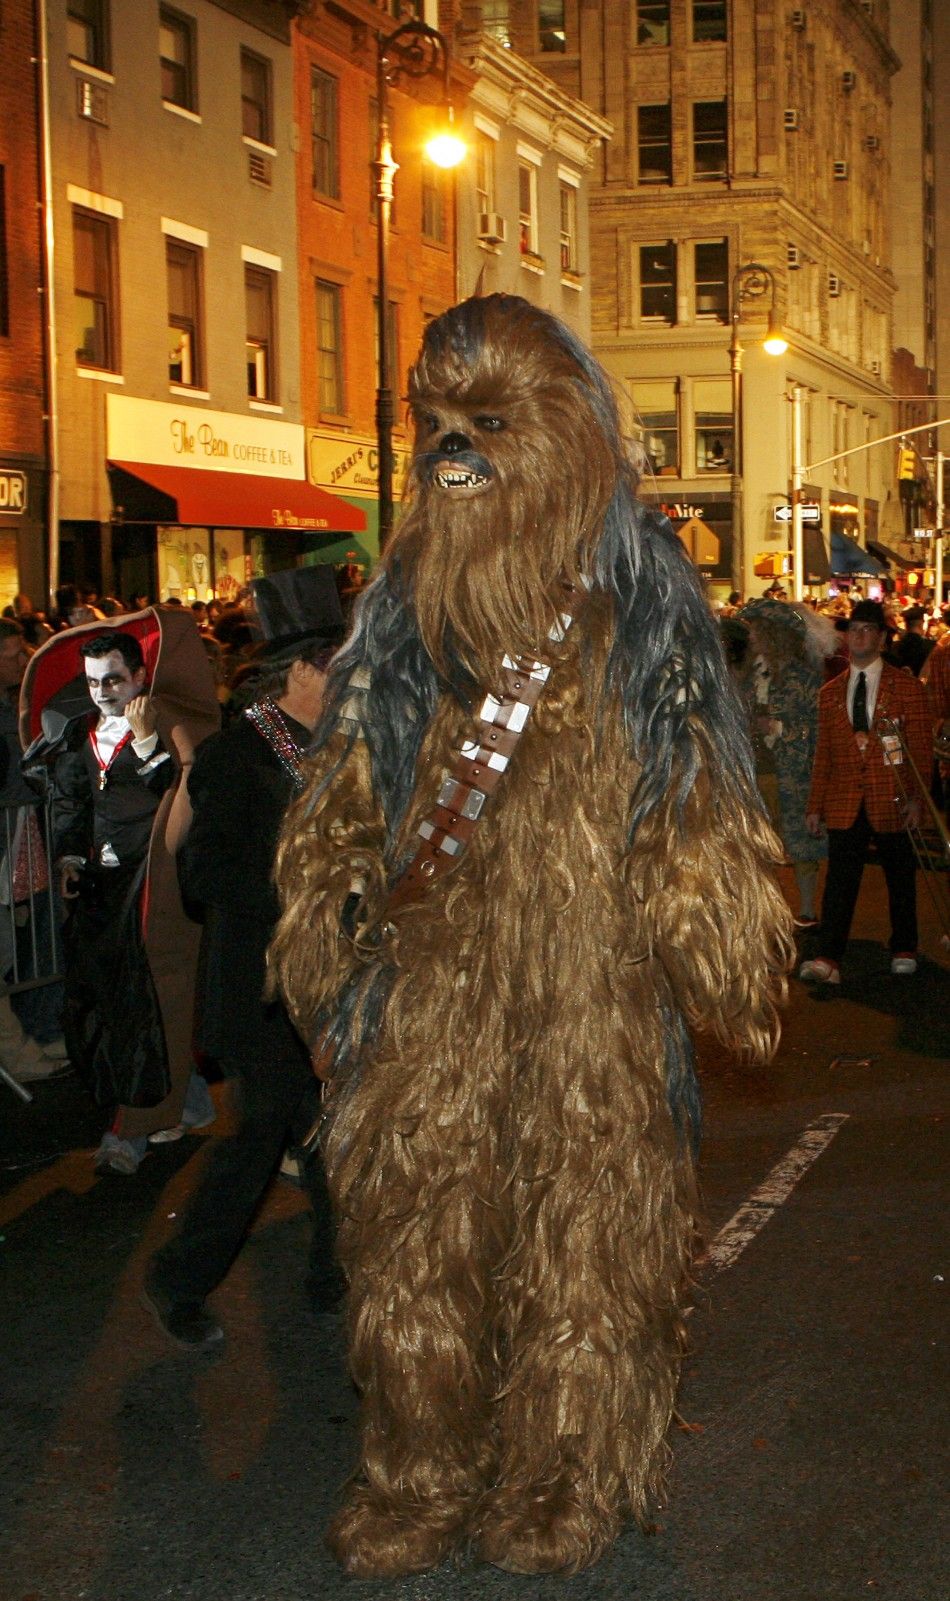 A participant dressed as Chewbacca from the film quotStar Warsquot takes part in the annual Greenwich Village Halloween Parade in New York